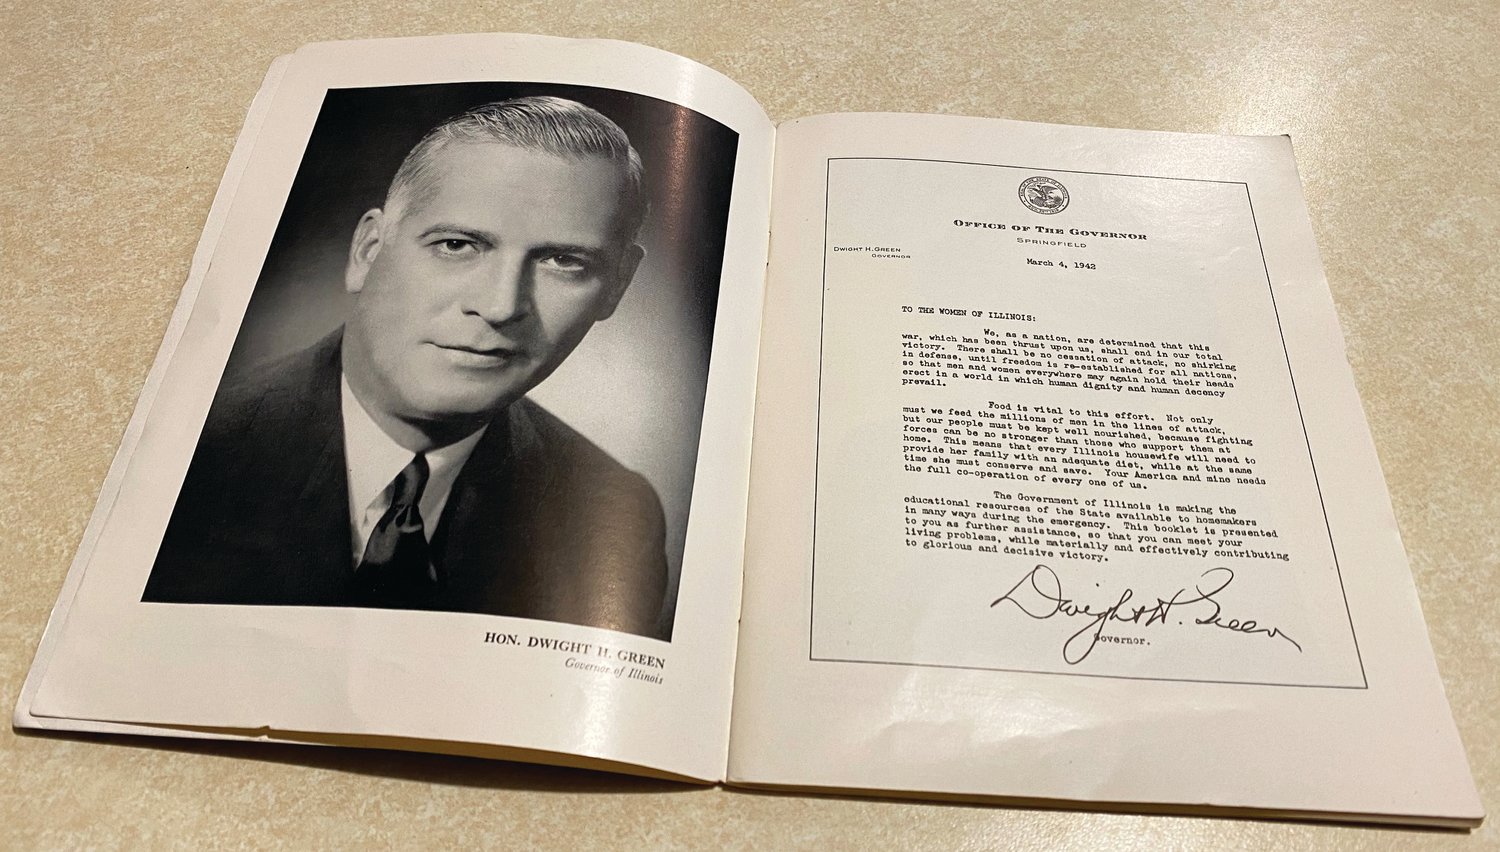 Gov. Dwight Green led Illinois during the World War II years and part of that effort was a state publication, “Home Budgets for Victory,” encouraging Illinois women to be frugal in managing home and cooking and stretch every resource as far as possible.